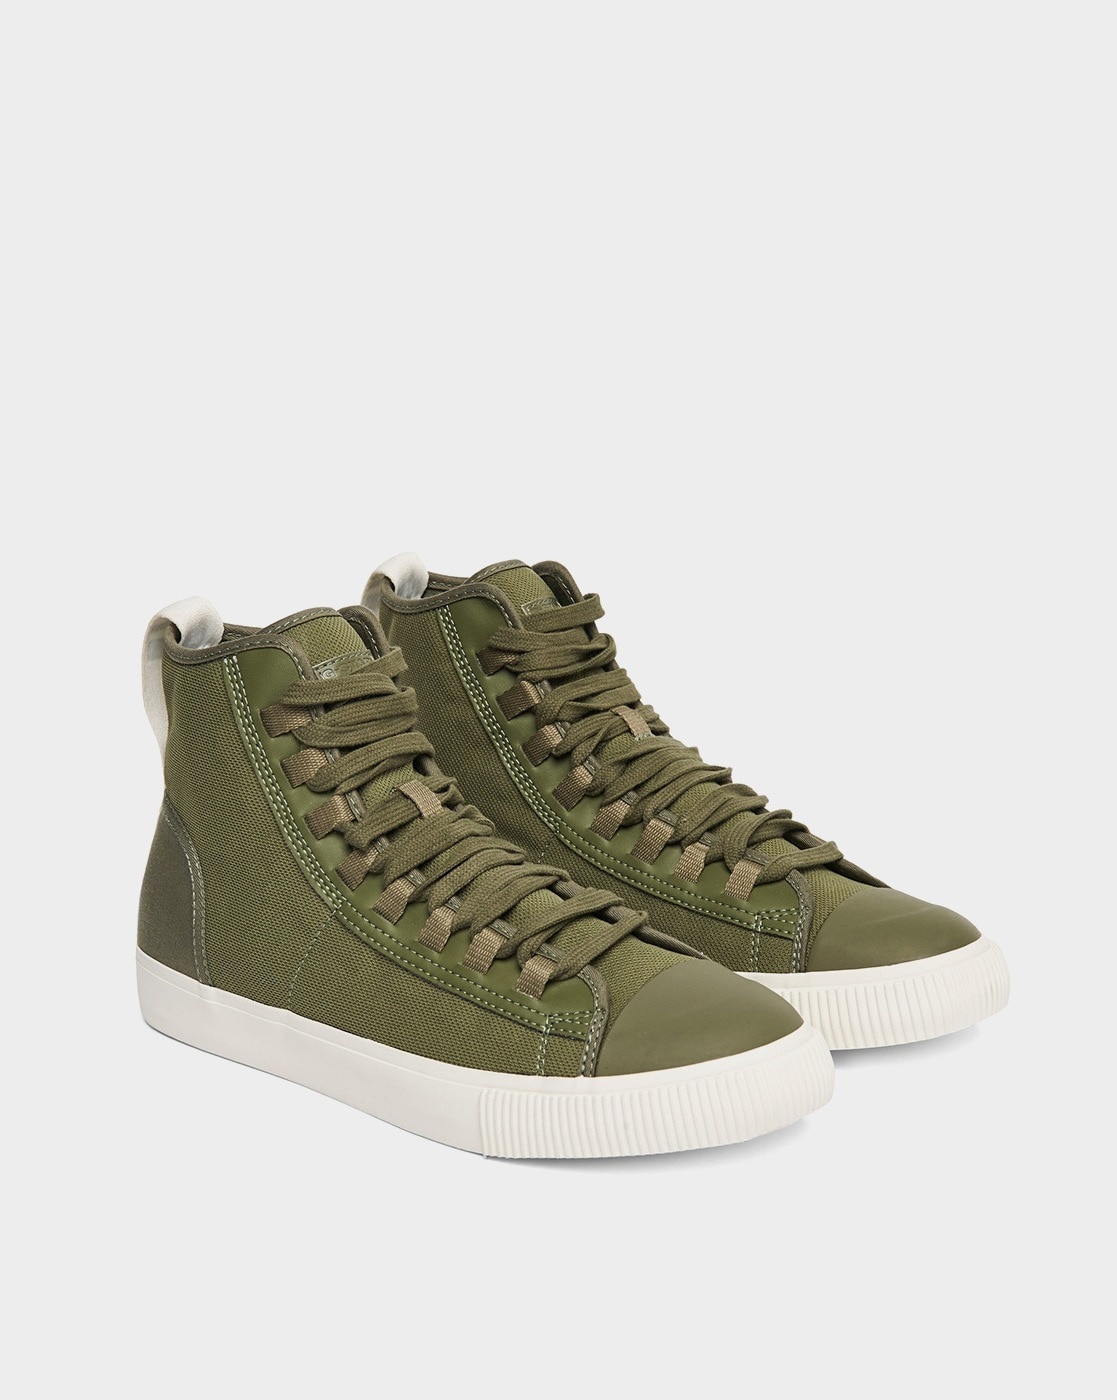 Olive Sneakers for Men by G STAR RAW 